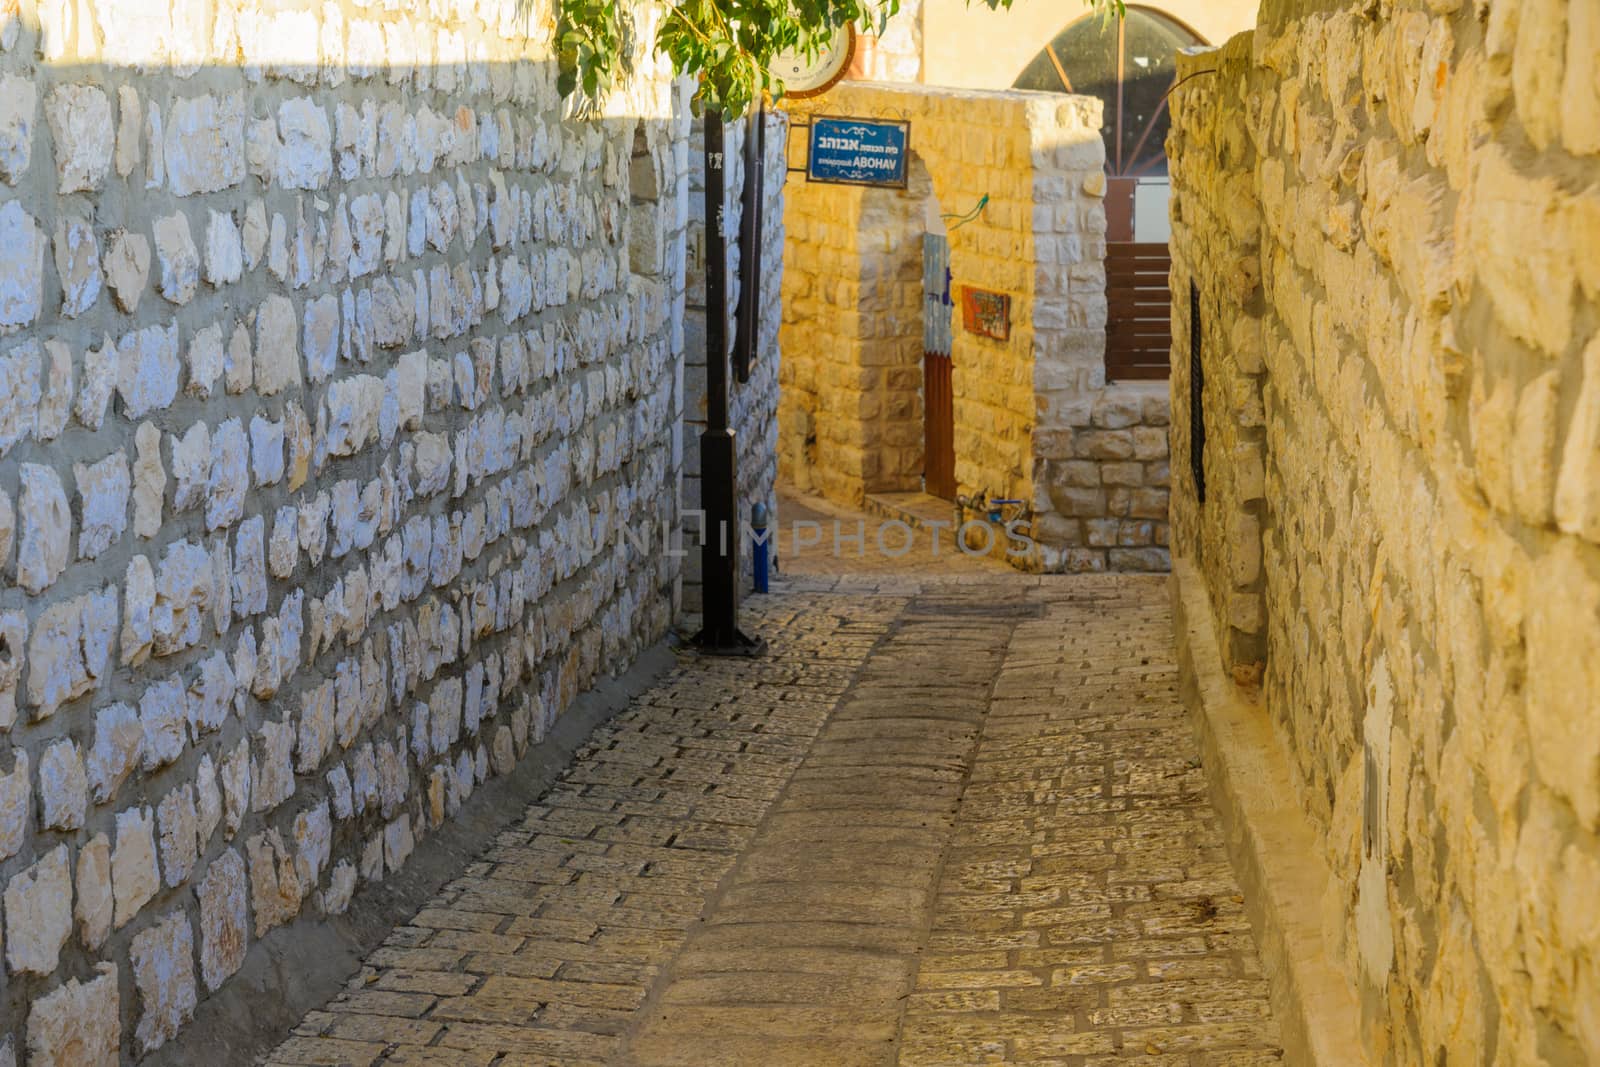 SAFED, ISRAEL - SEPTEMBER 14, 2016: An alley in the Jewish quarter of the old city, with the Abuhav Synagogue sign, in Safed (Tzfat), Israel